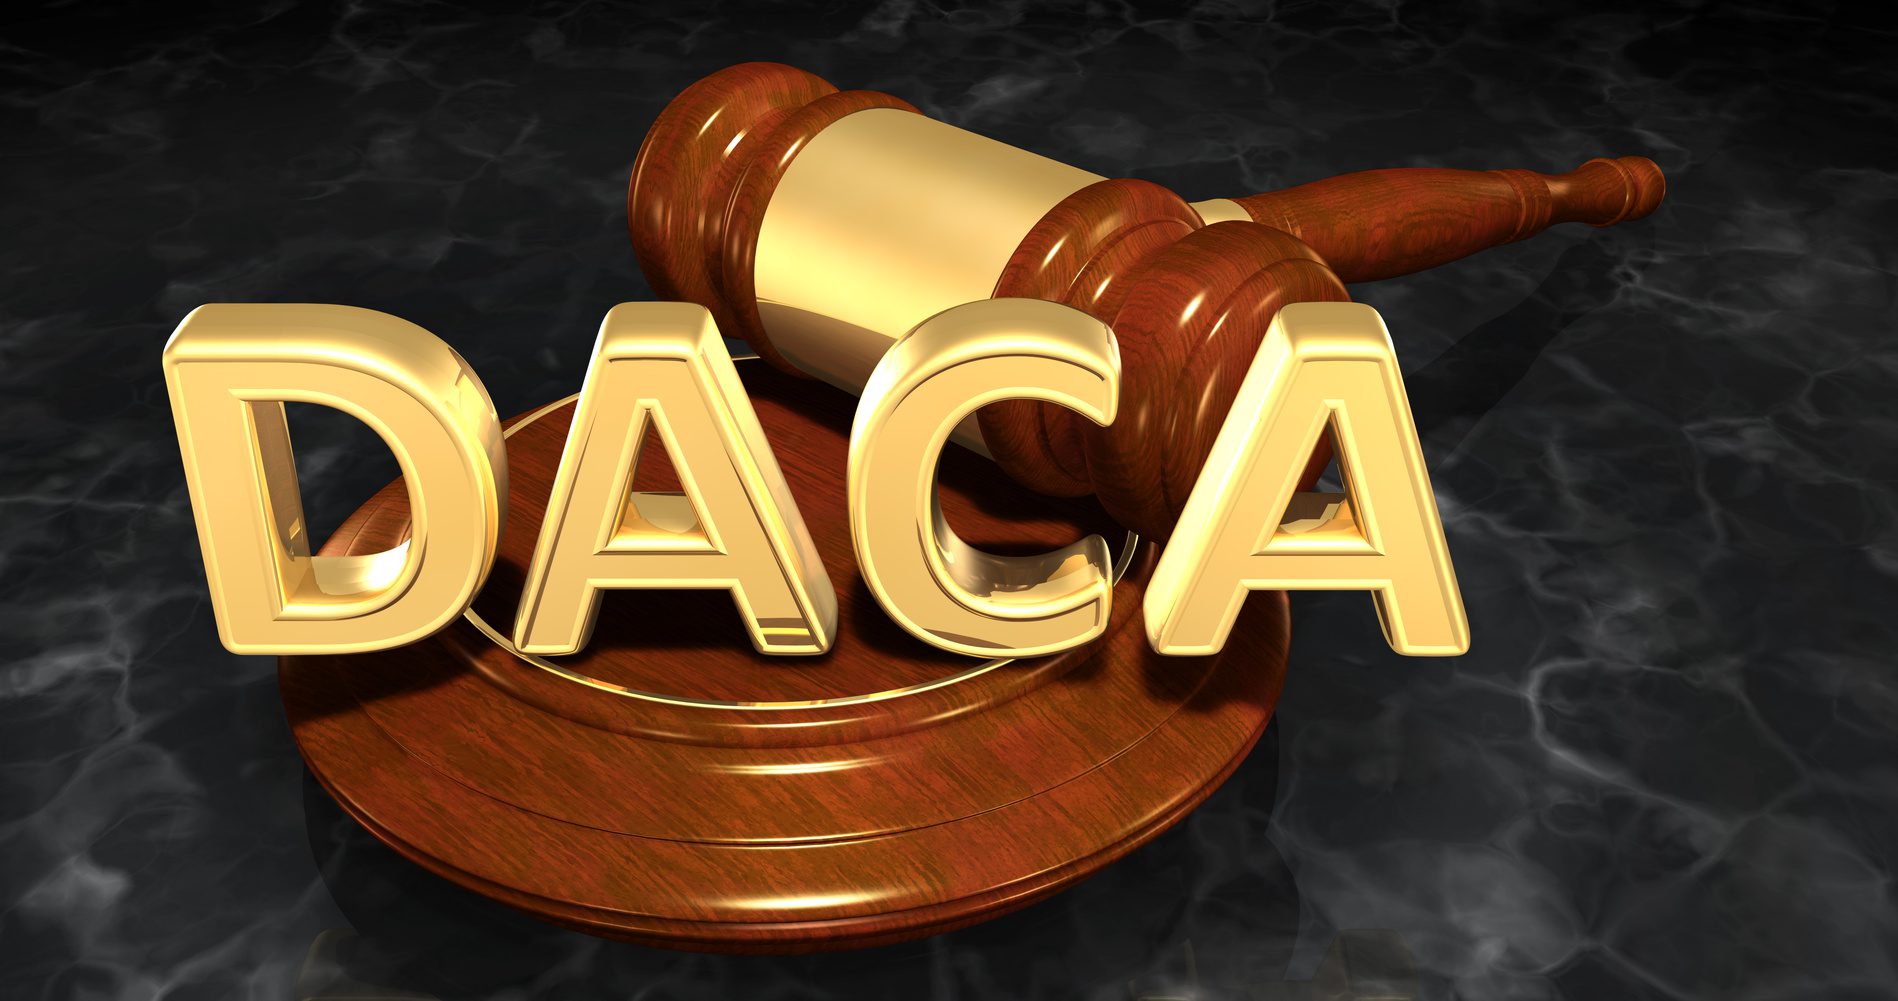 Latest DACA Updates: Federal Judge Prohibits Approval of New DACA Requests